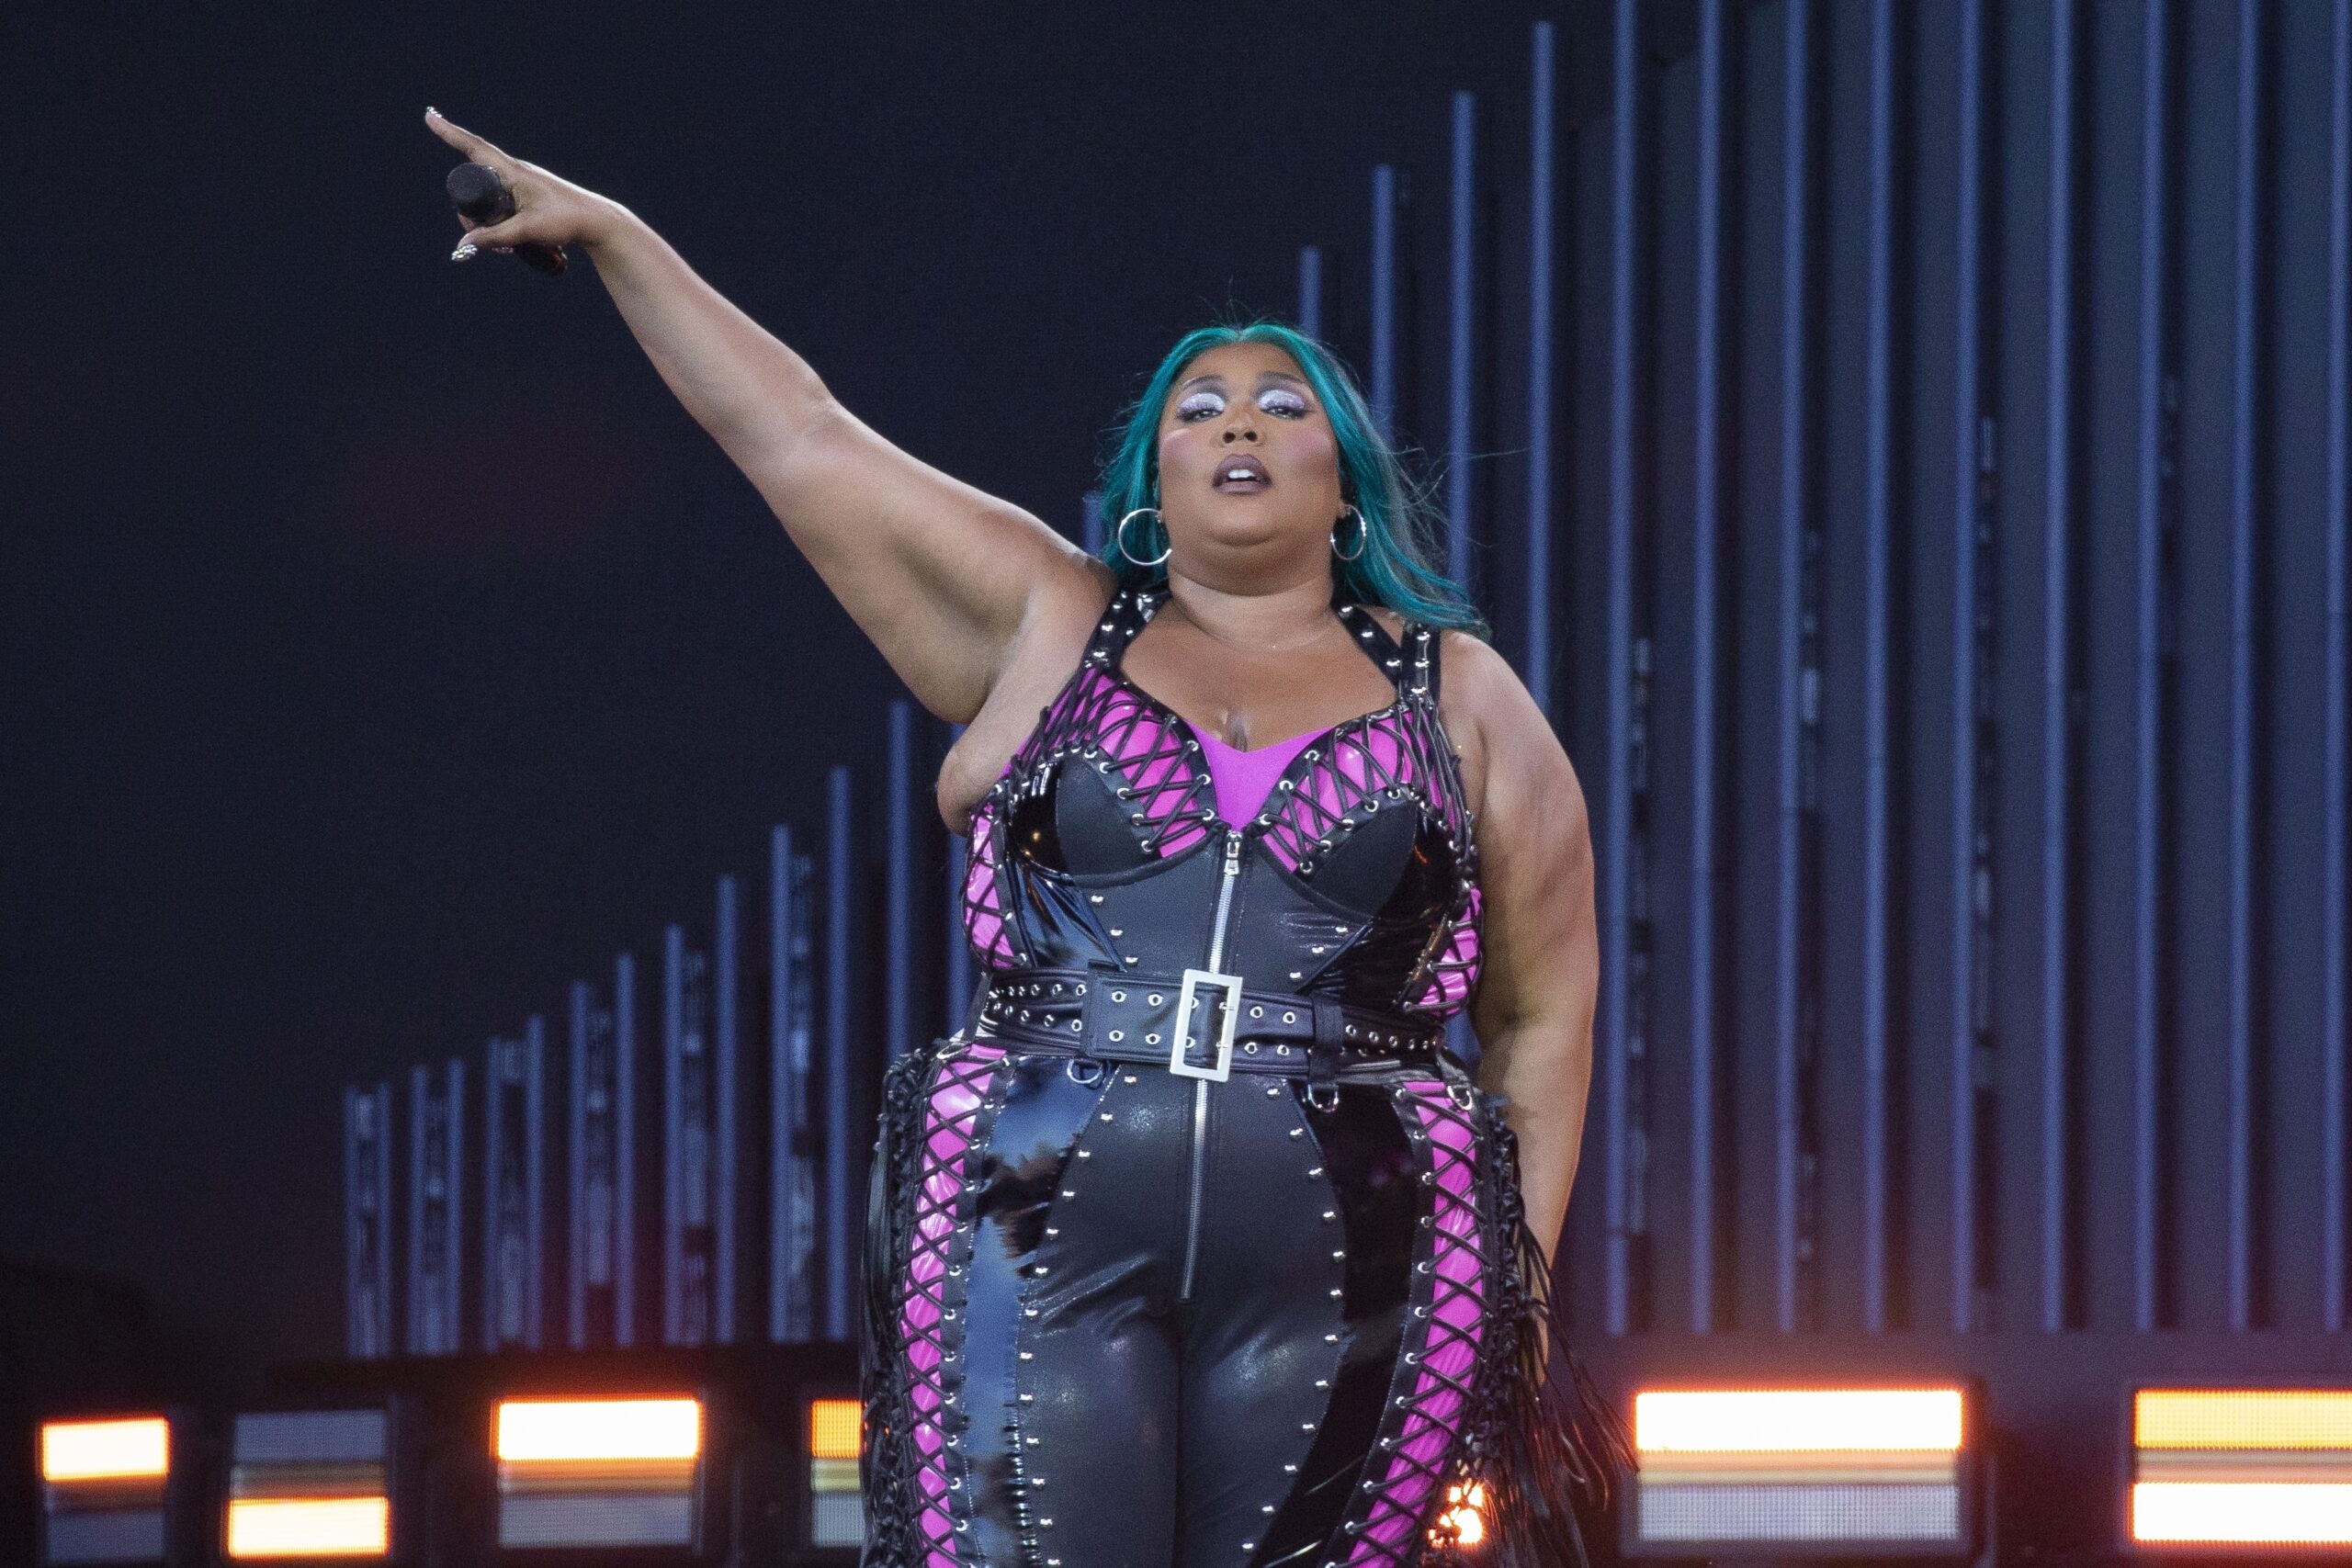 Singer Lizzo has been sued by three of her former dancers who accuse the Grammy winner of sexual harassment, weight shaming, assault, and more.